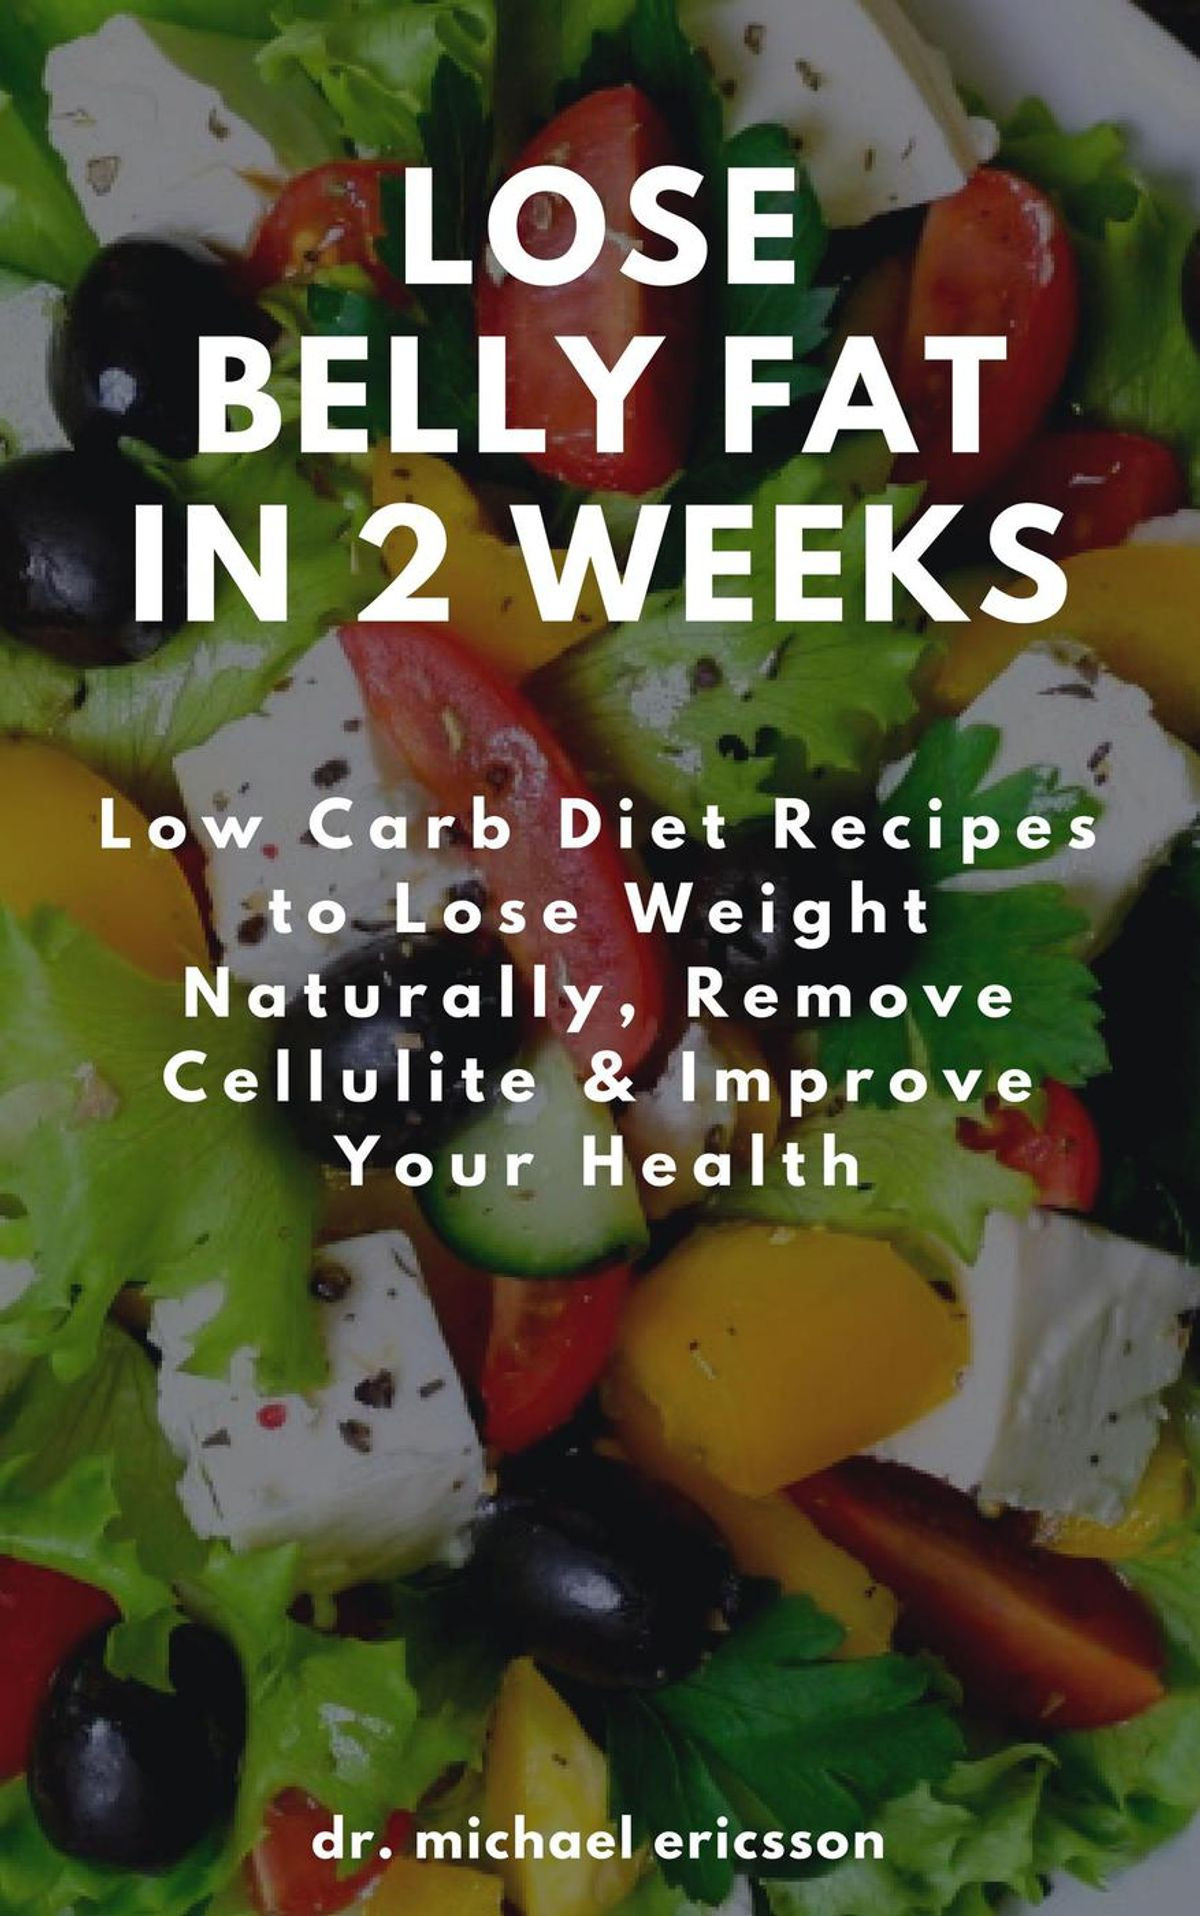 How To Lose Belly Fat In Two Weeks
 Lose Belly Fat in 2 Weeks Low Carb Diet Recipes to Lose